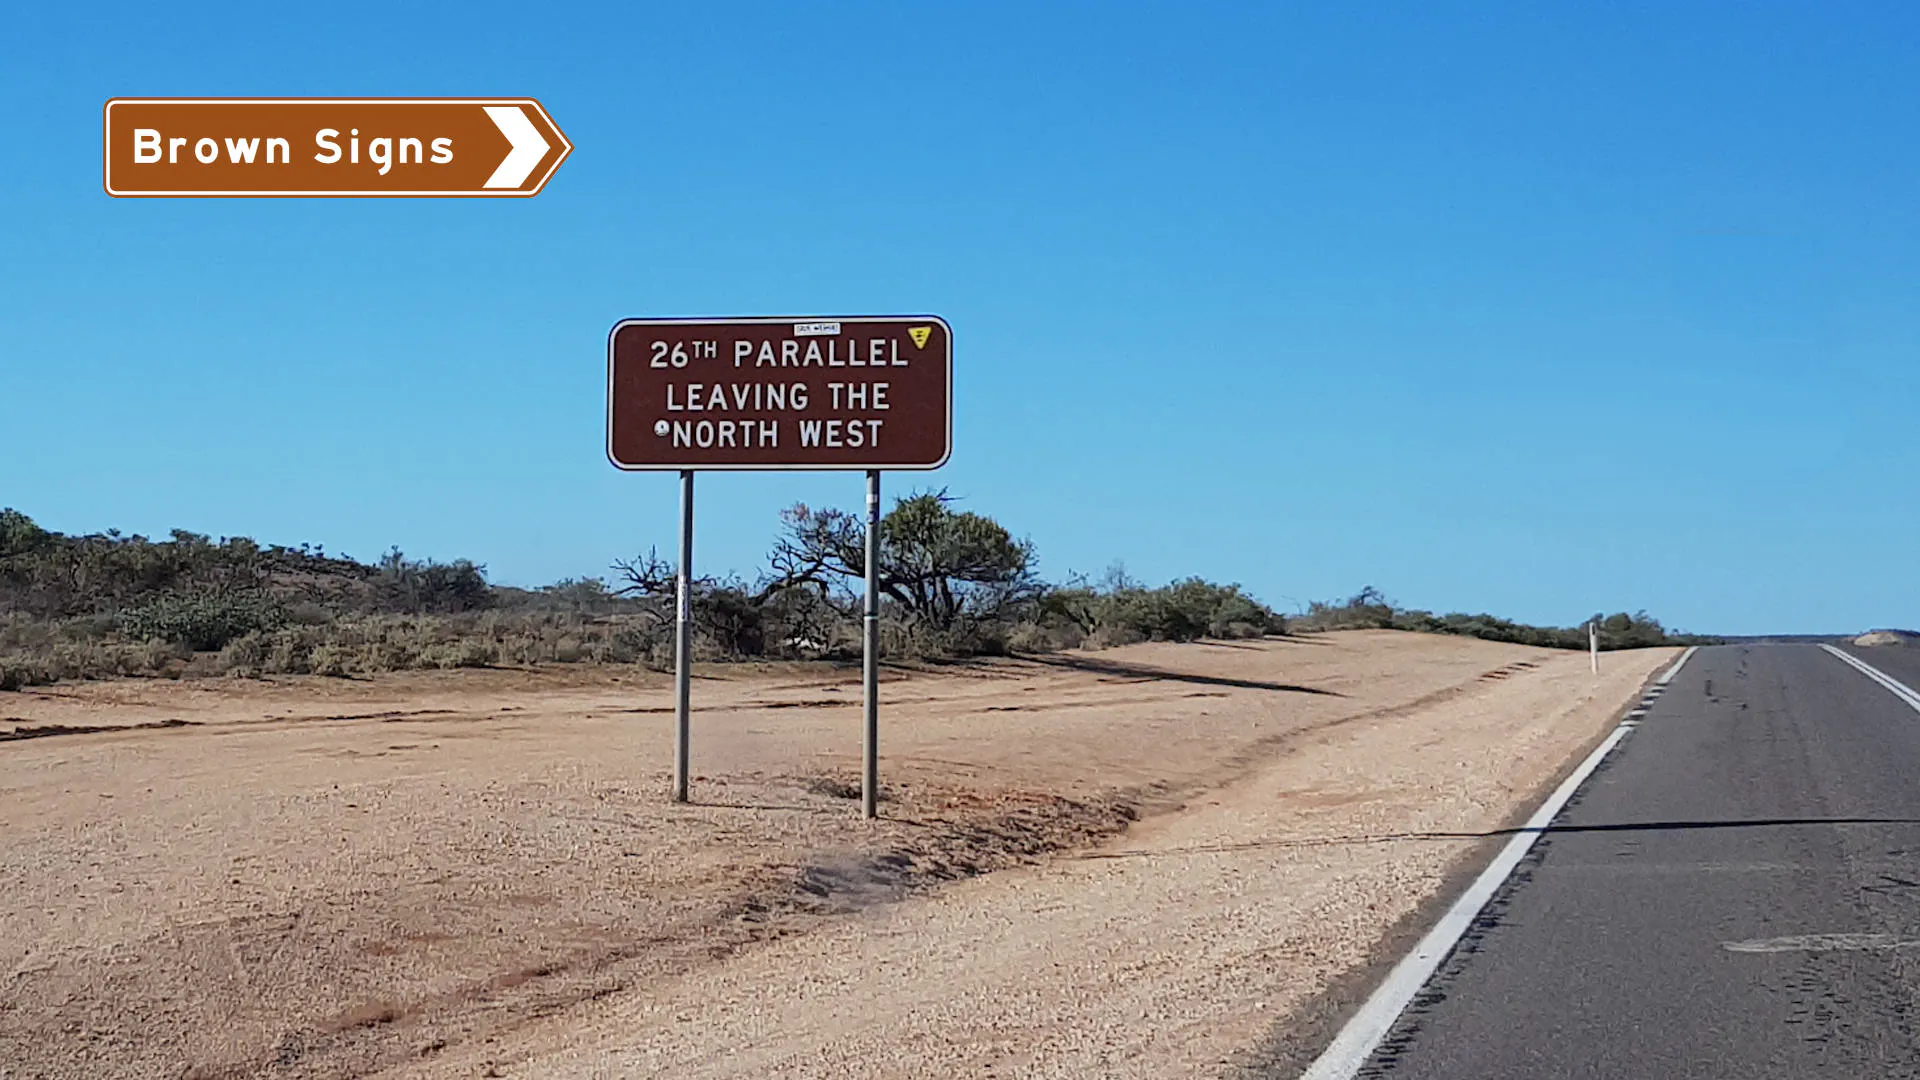 Brown sign at the 26th Parallel on the edge of the North West region in Western Australia